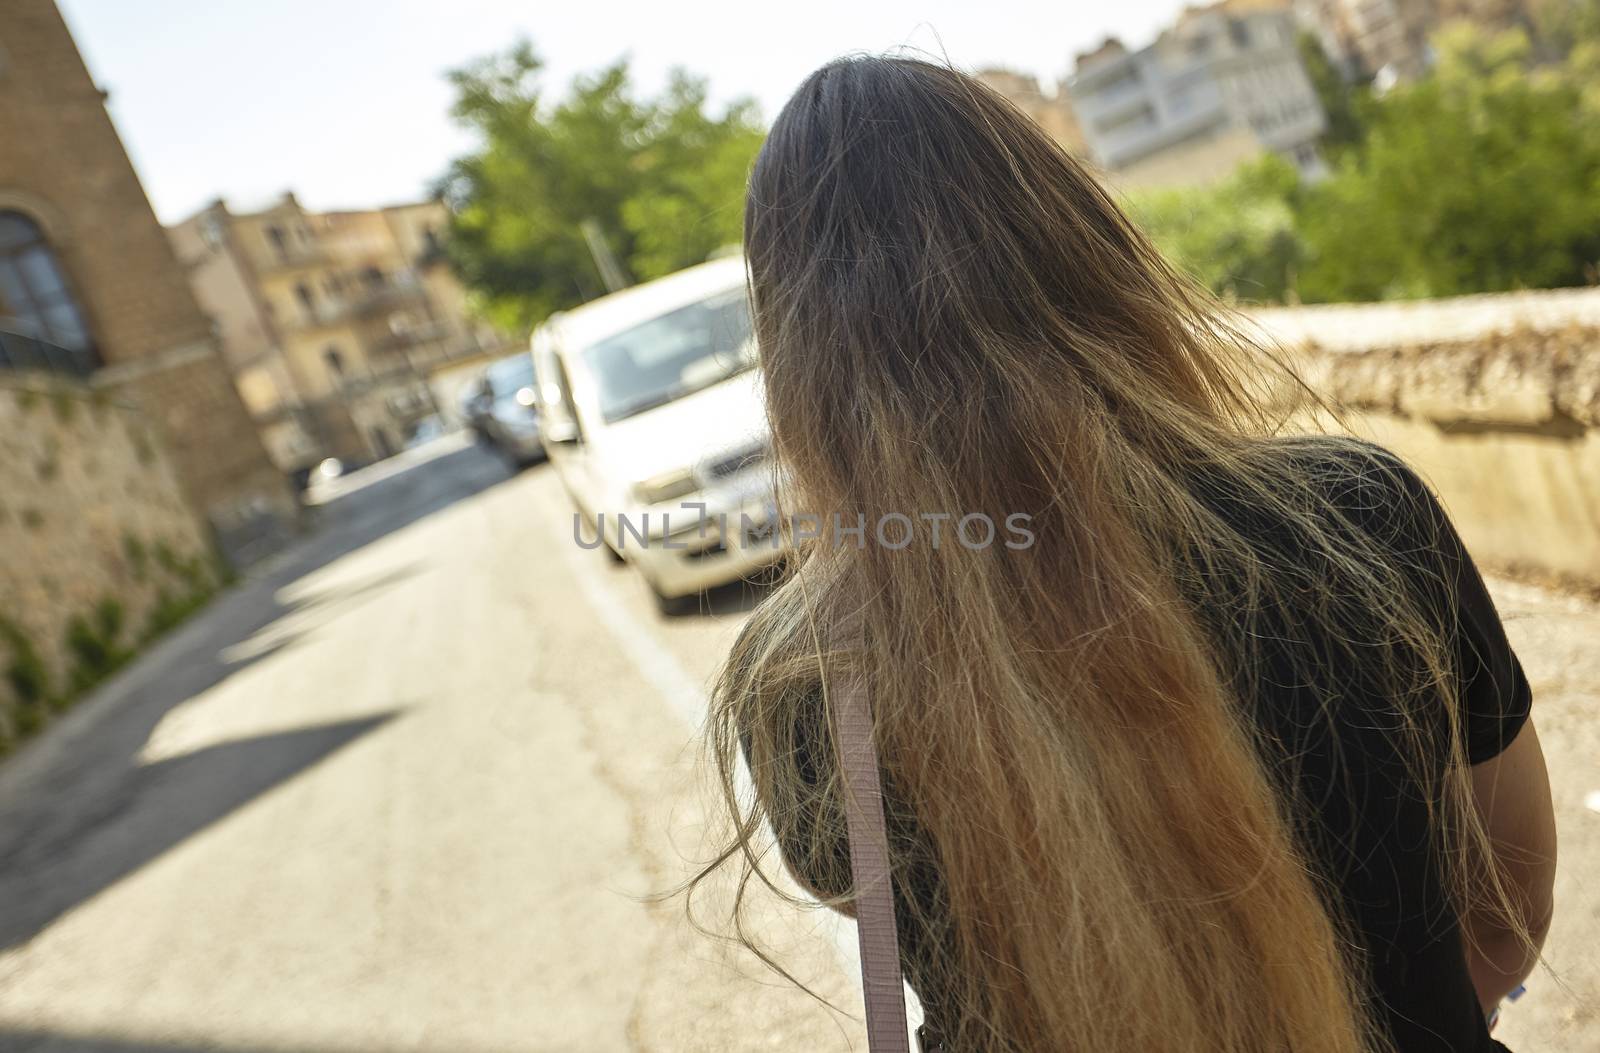 Girl from the back walks alone in the street during daytime